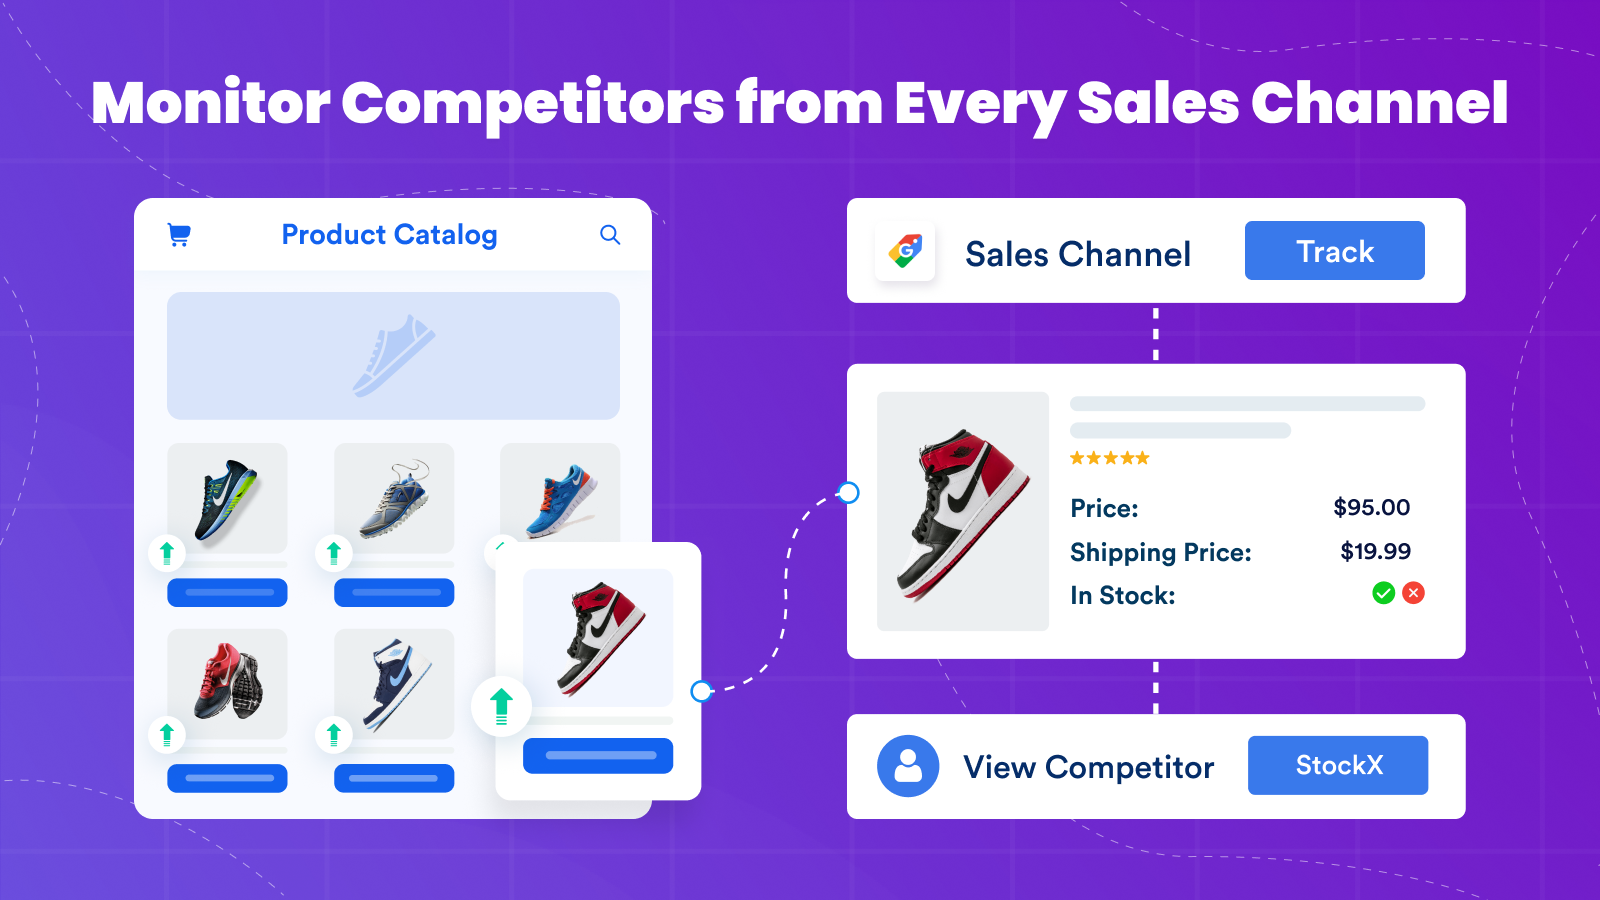 Reveal competitors from each sales channel